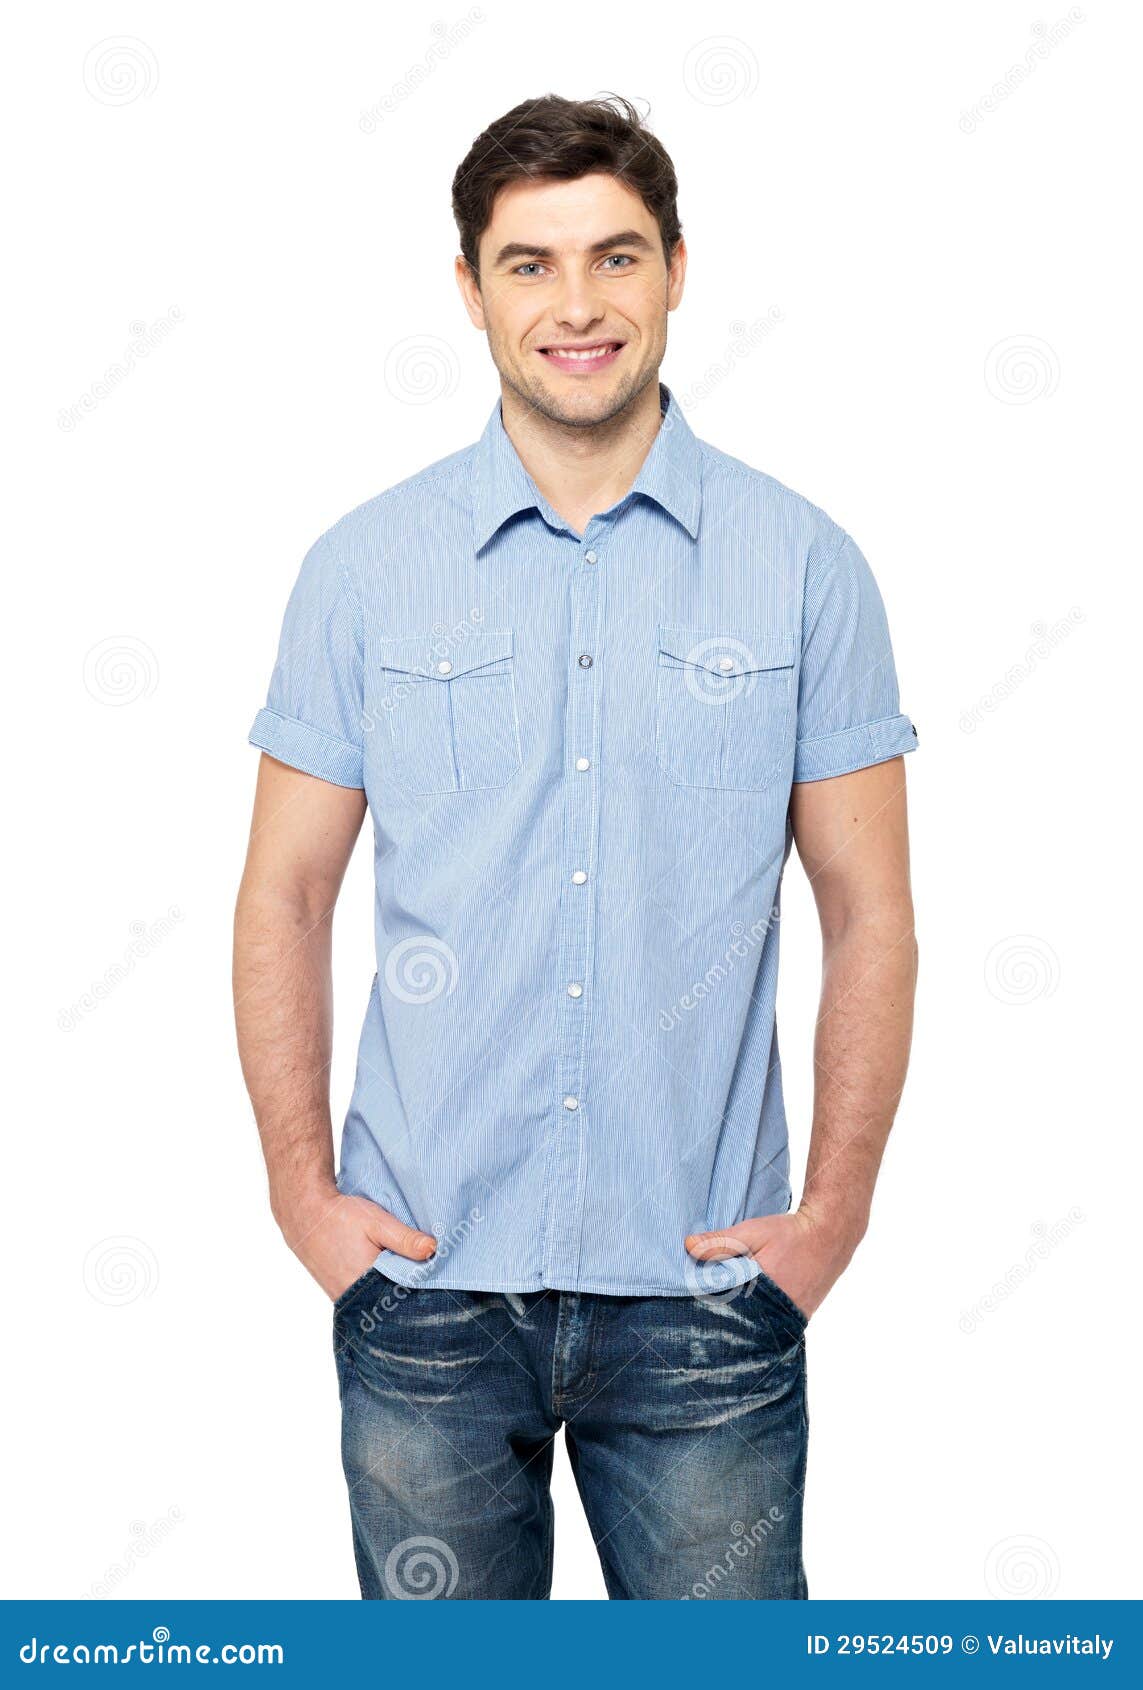 Portrait Happy Man in Blue Casual Stock Image Image of copy, happiness: